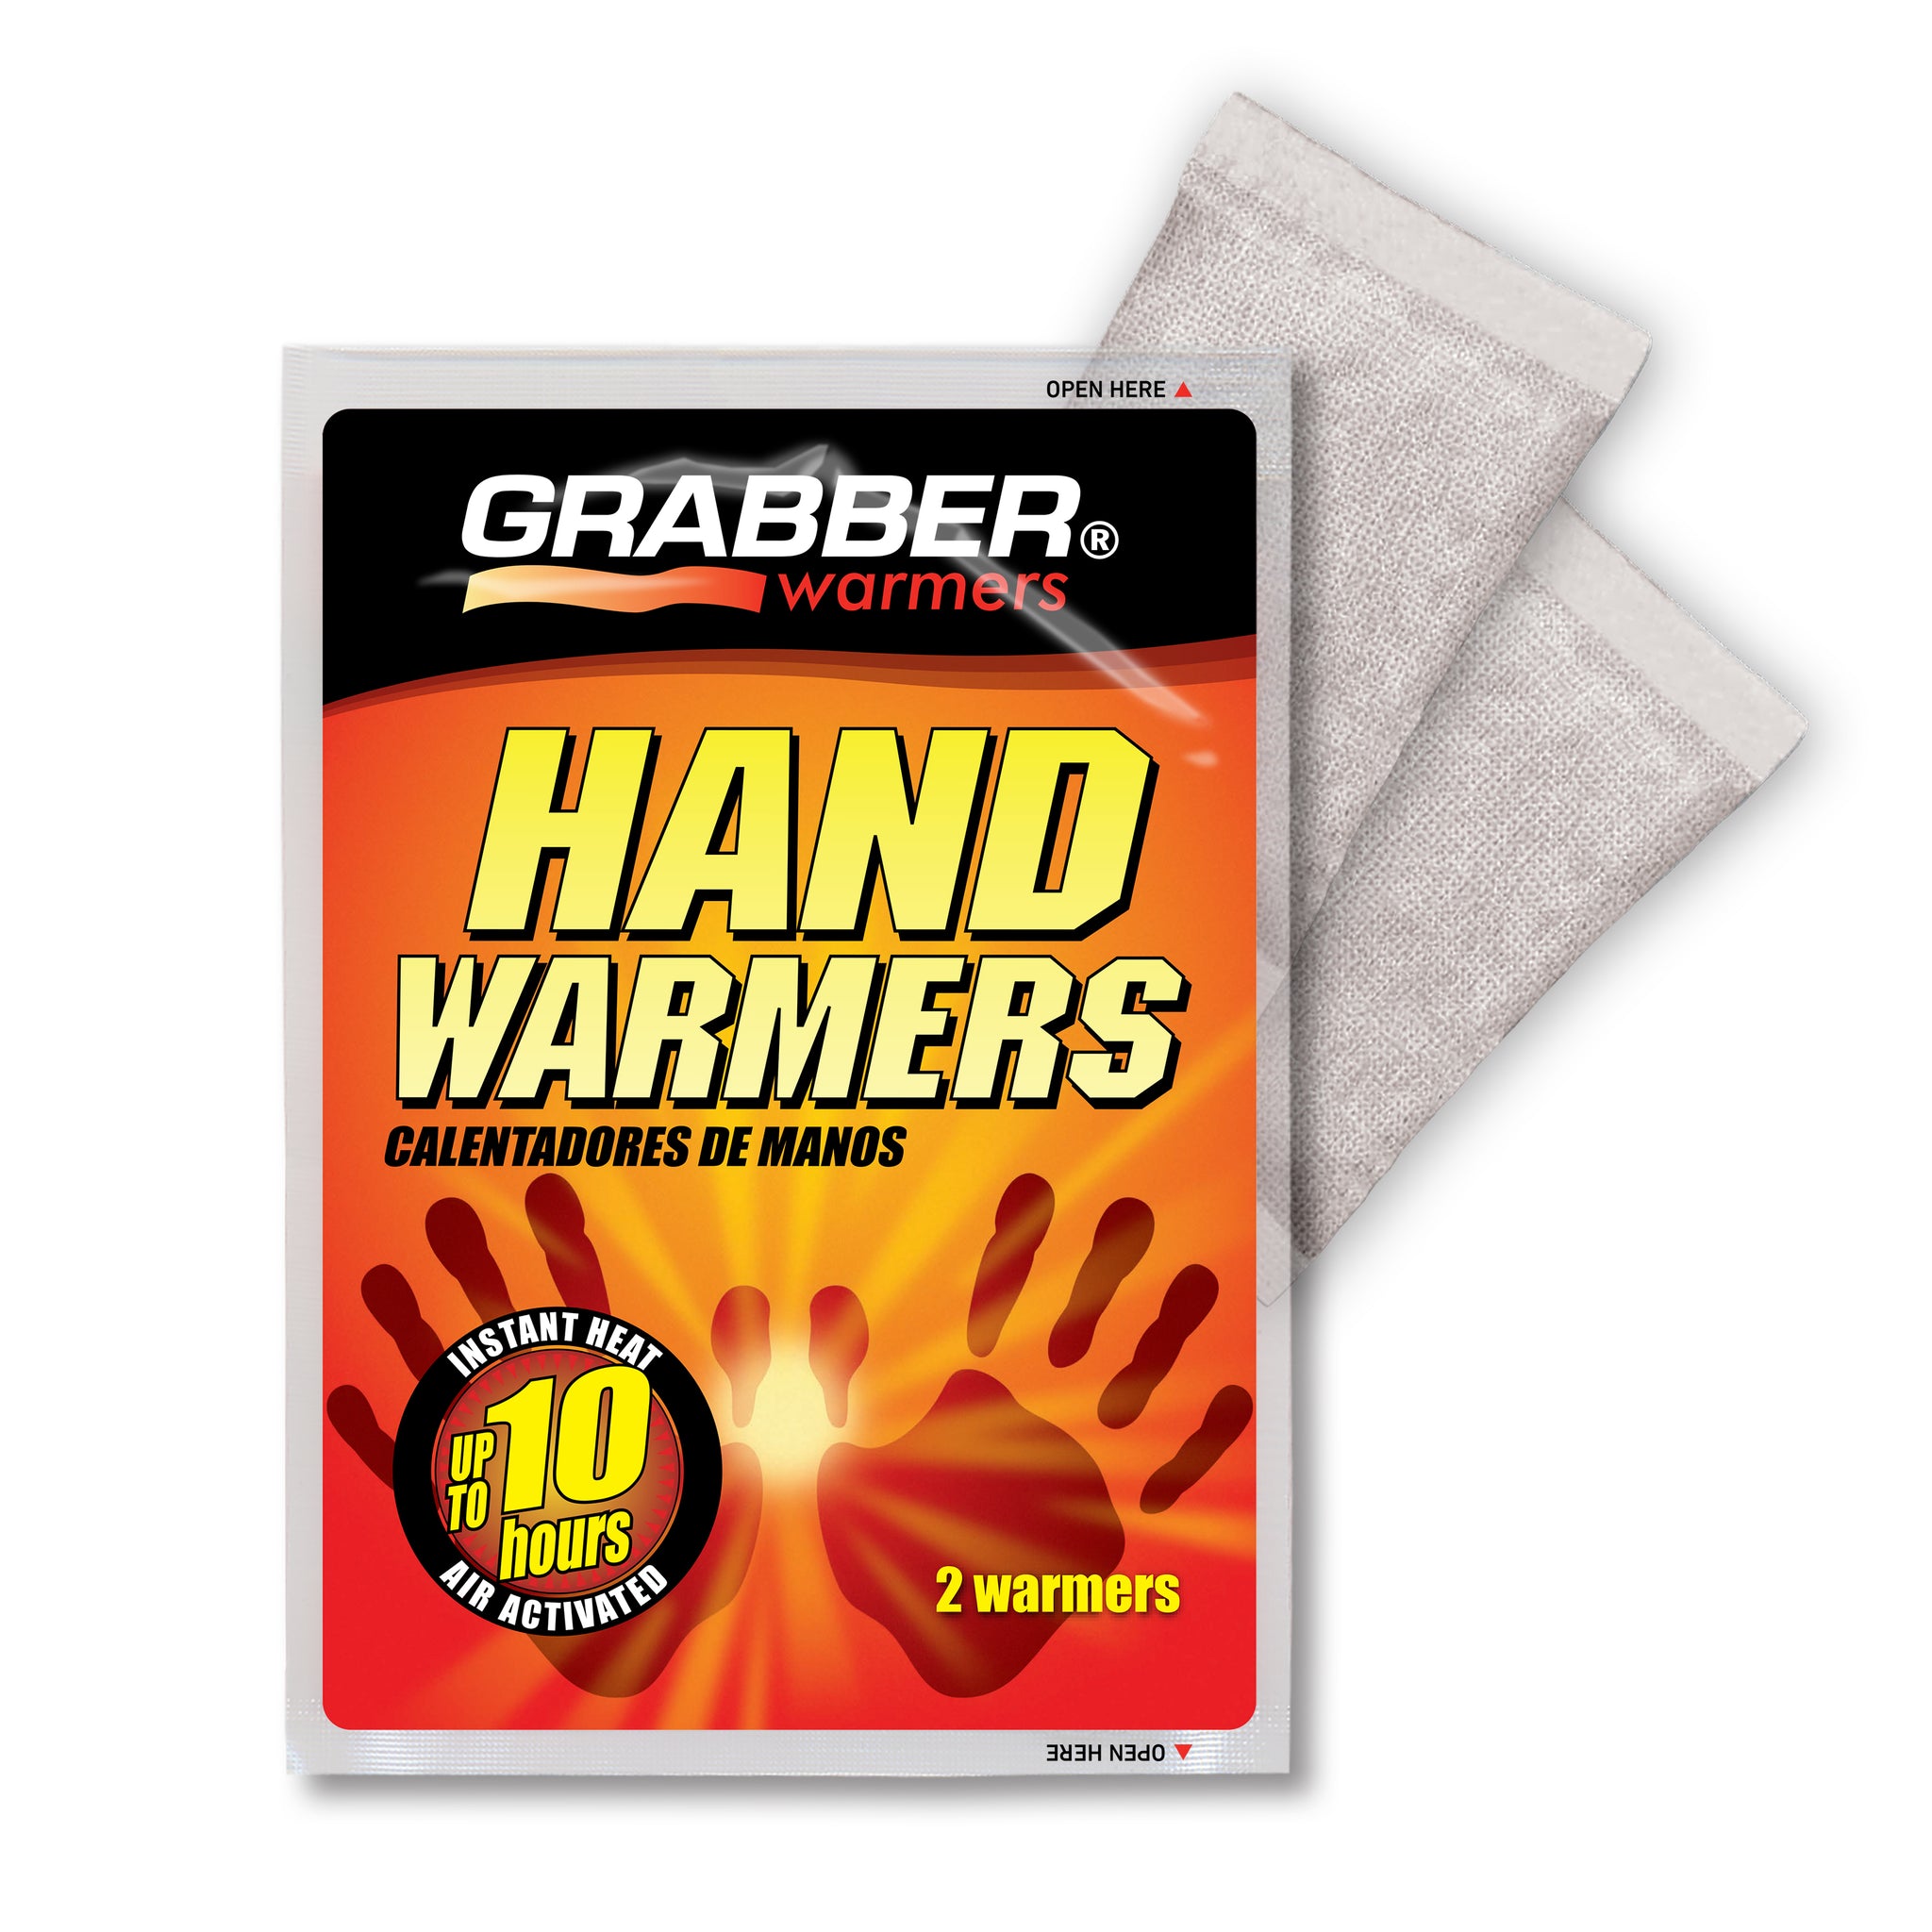 HotHands hand warmers review